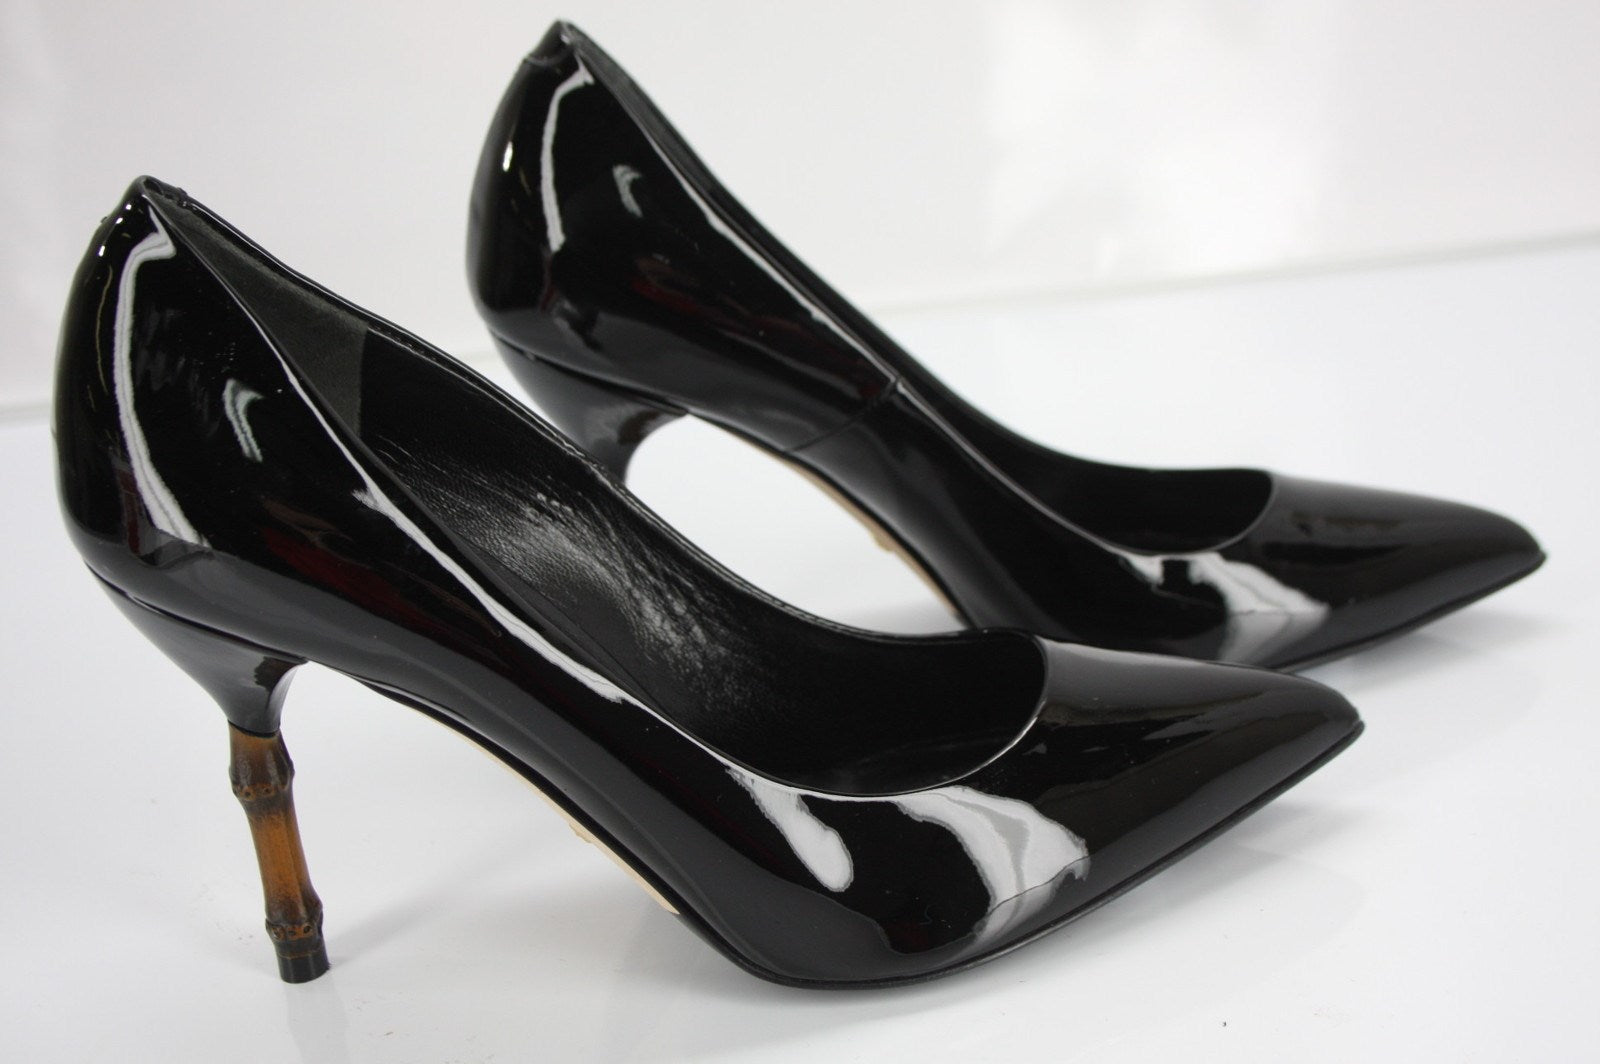 Gucci Black Patent Kristen Pointy Toe Bamboo Heels Pumps Size 35 New $670 Womens